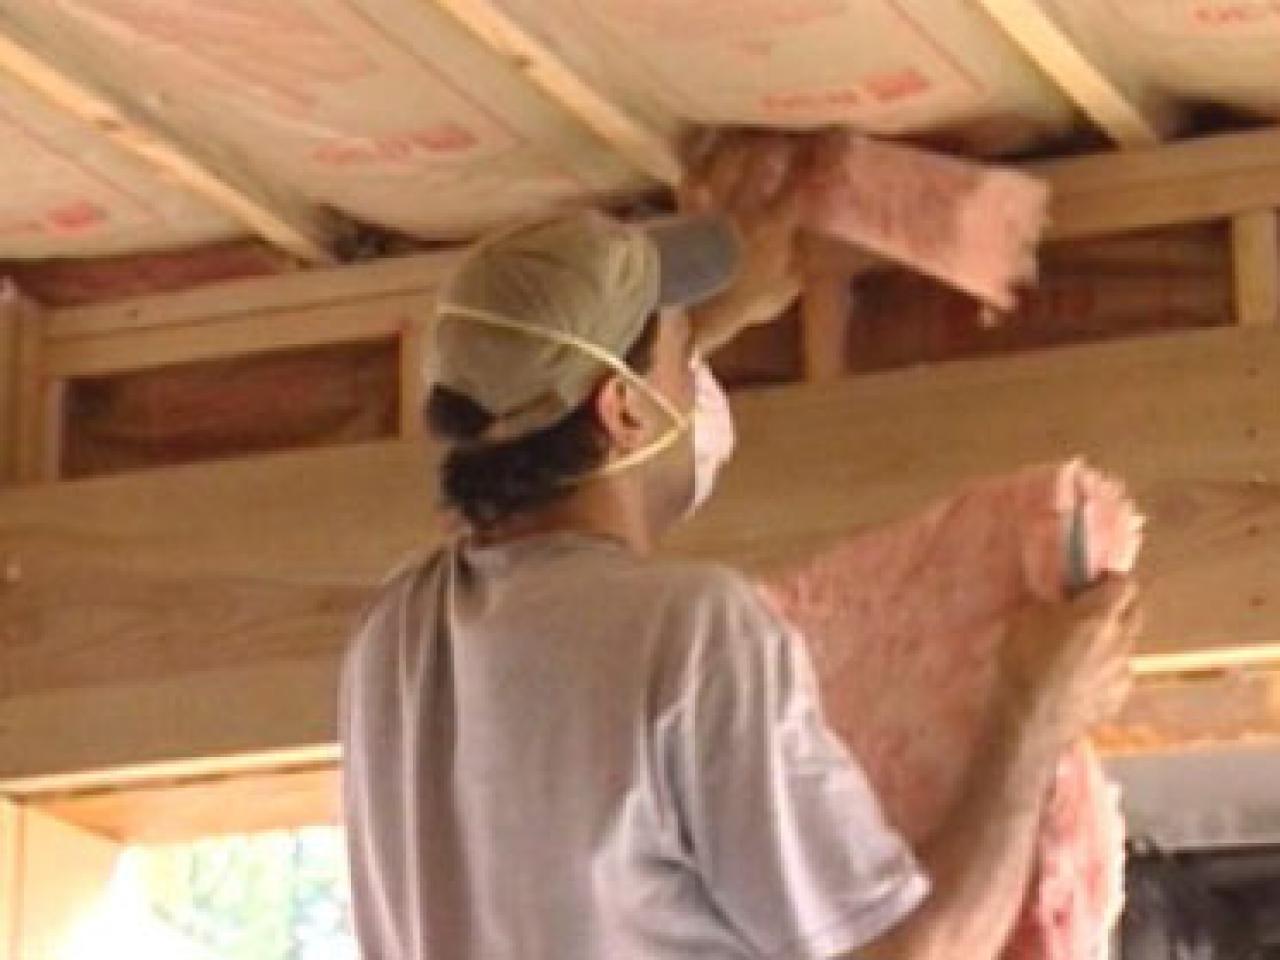 What You Should Know About Installing Insulation DIY